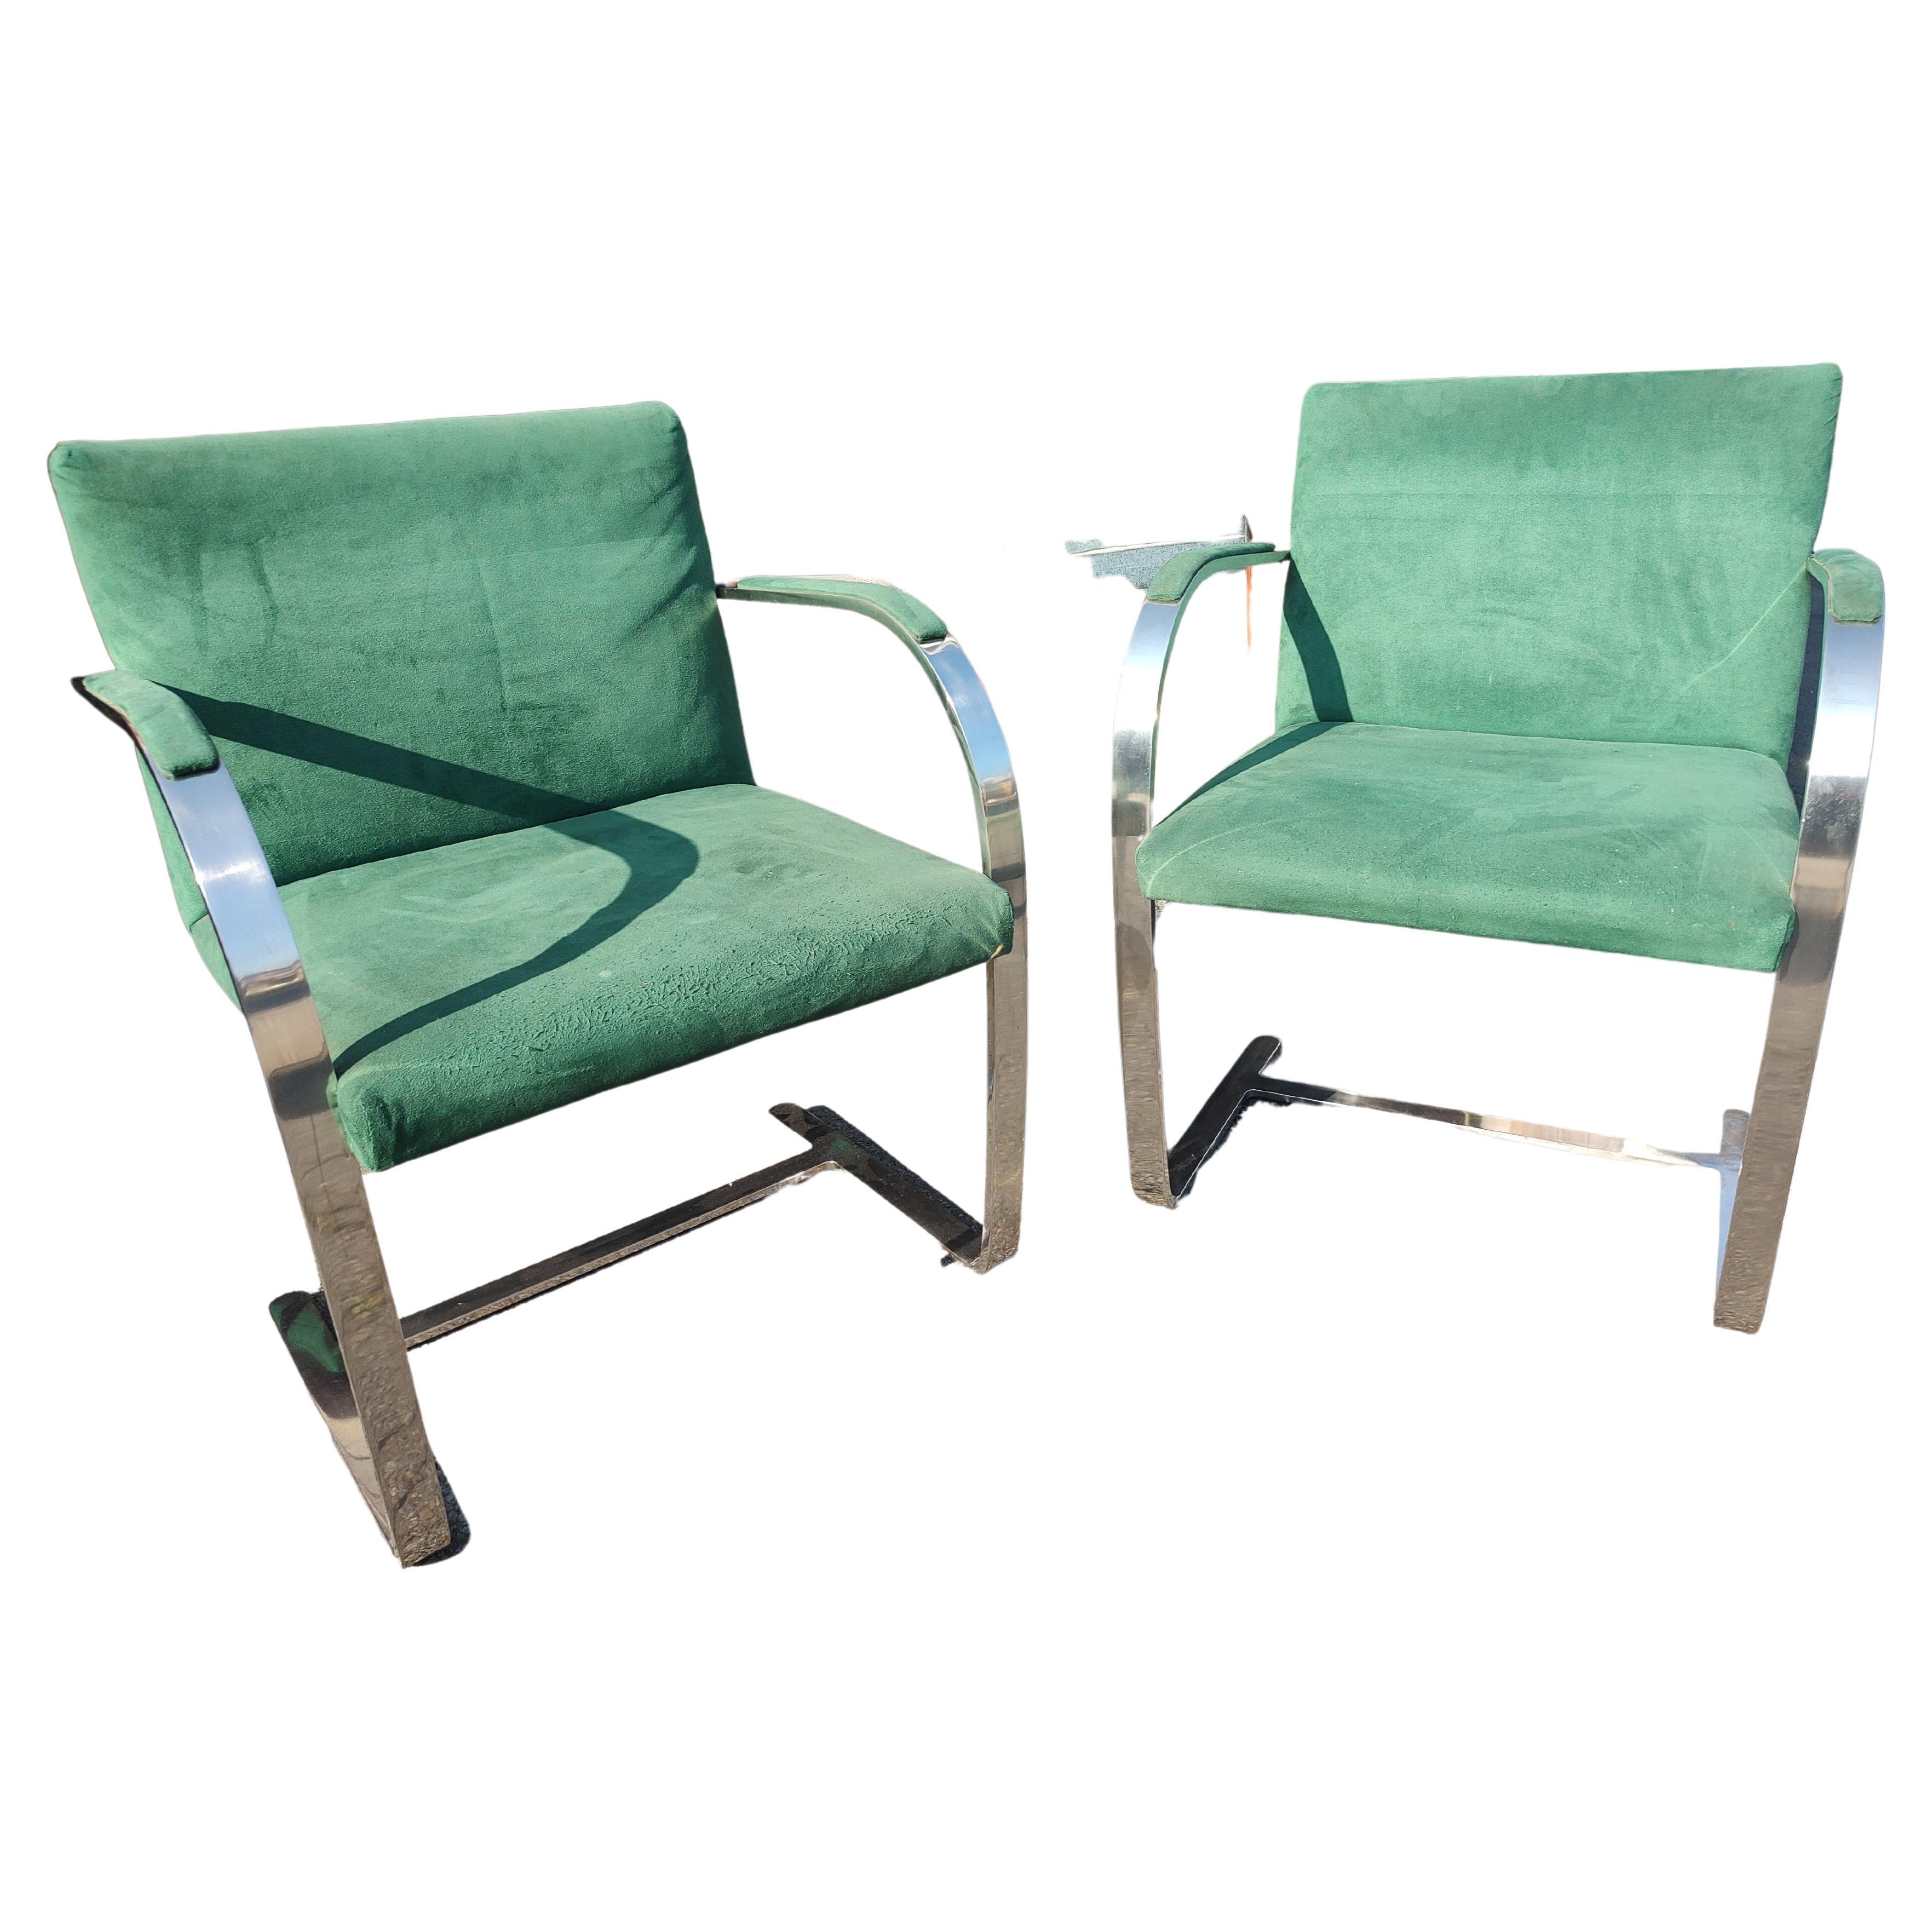 Late 20th Century Pair of Mid Century Modern Bauhaus Styled Brno Chairs  Ludwig Mies van DerRohe  For Sale